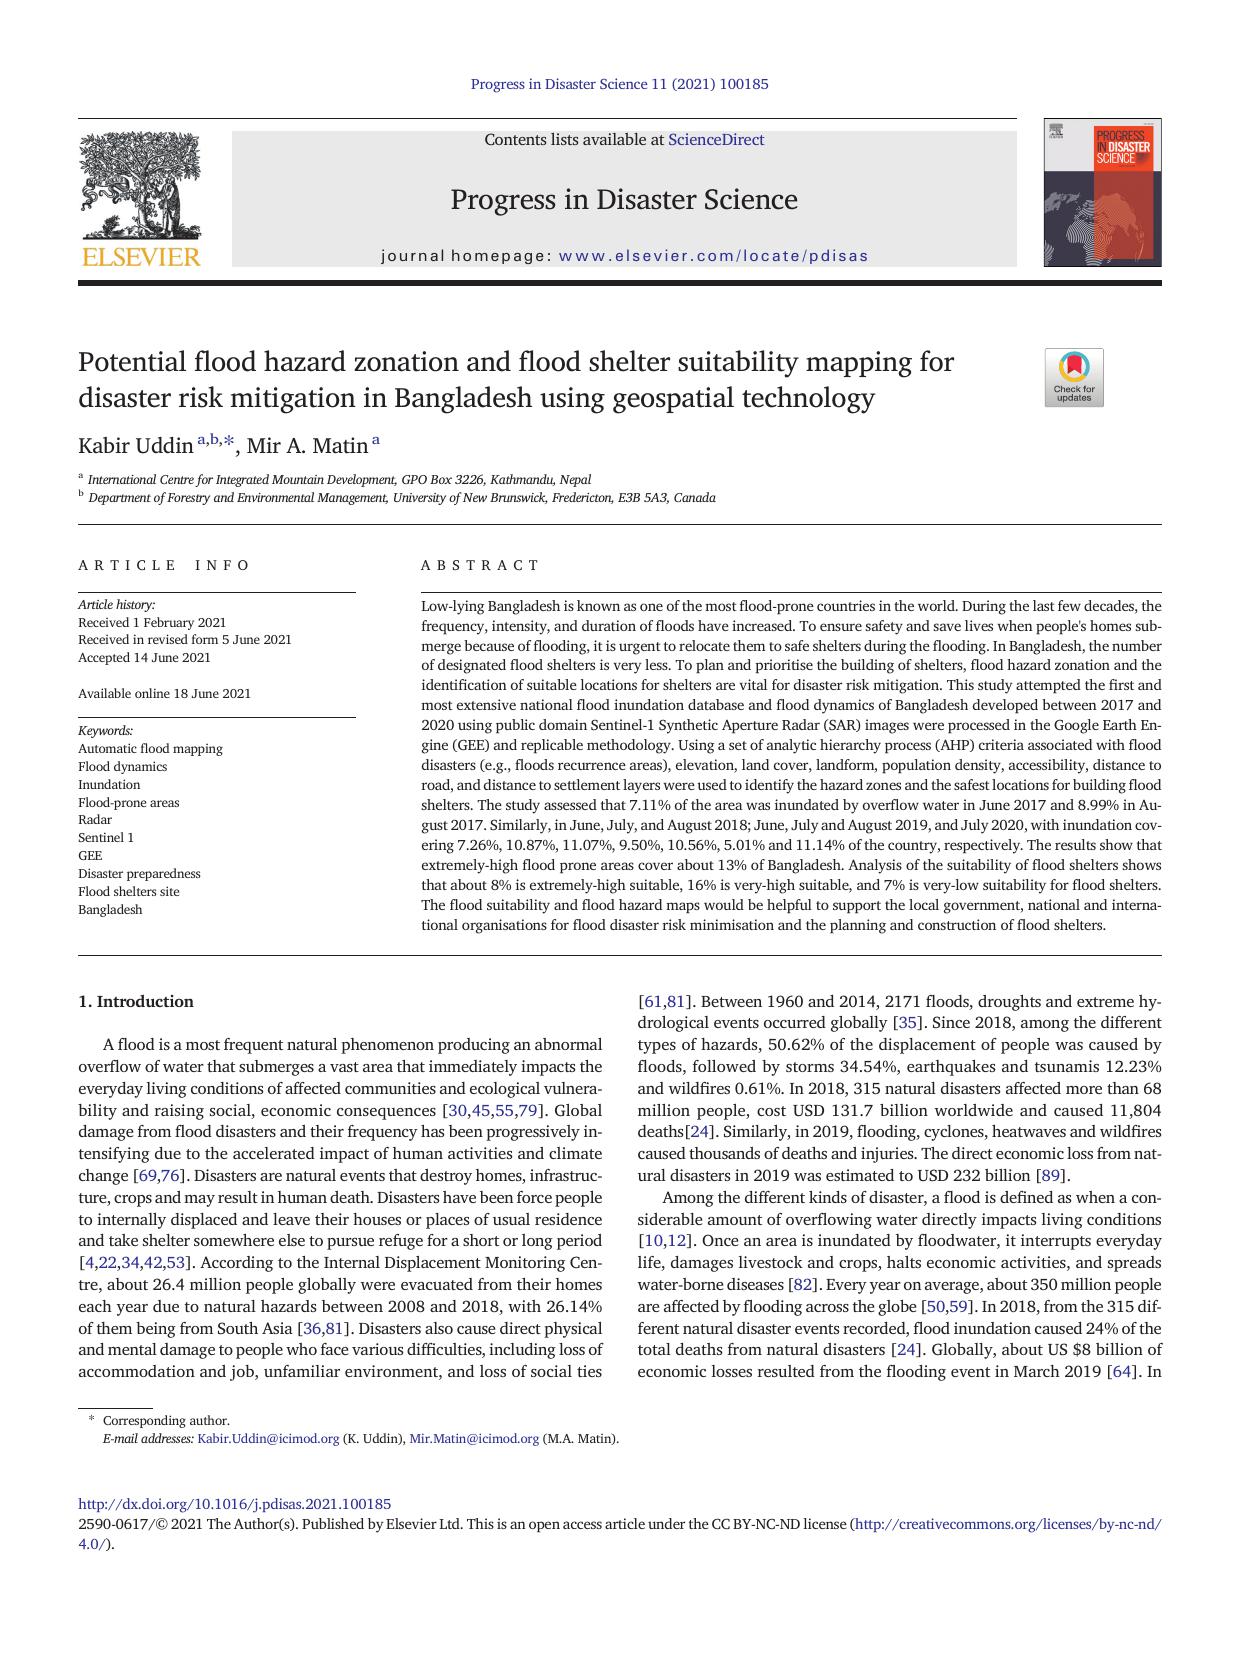 Potential flood hazard zonation and flood shelter suitability mapping for disaster risk mitigation in Bangladesh using geospatial technology